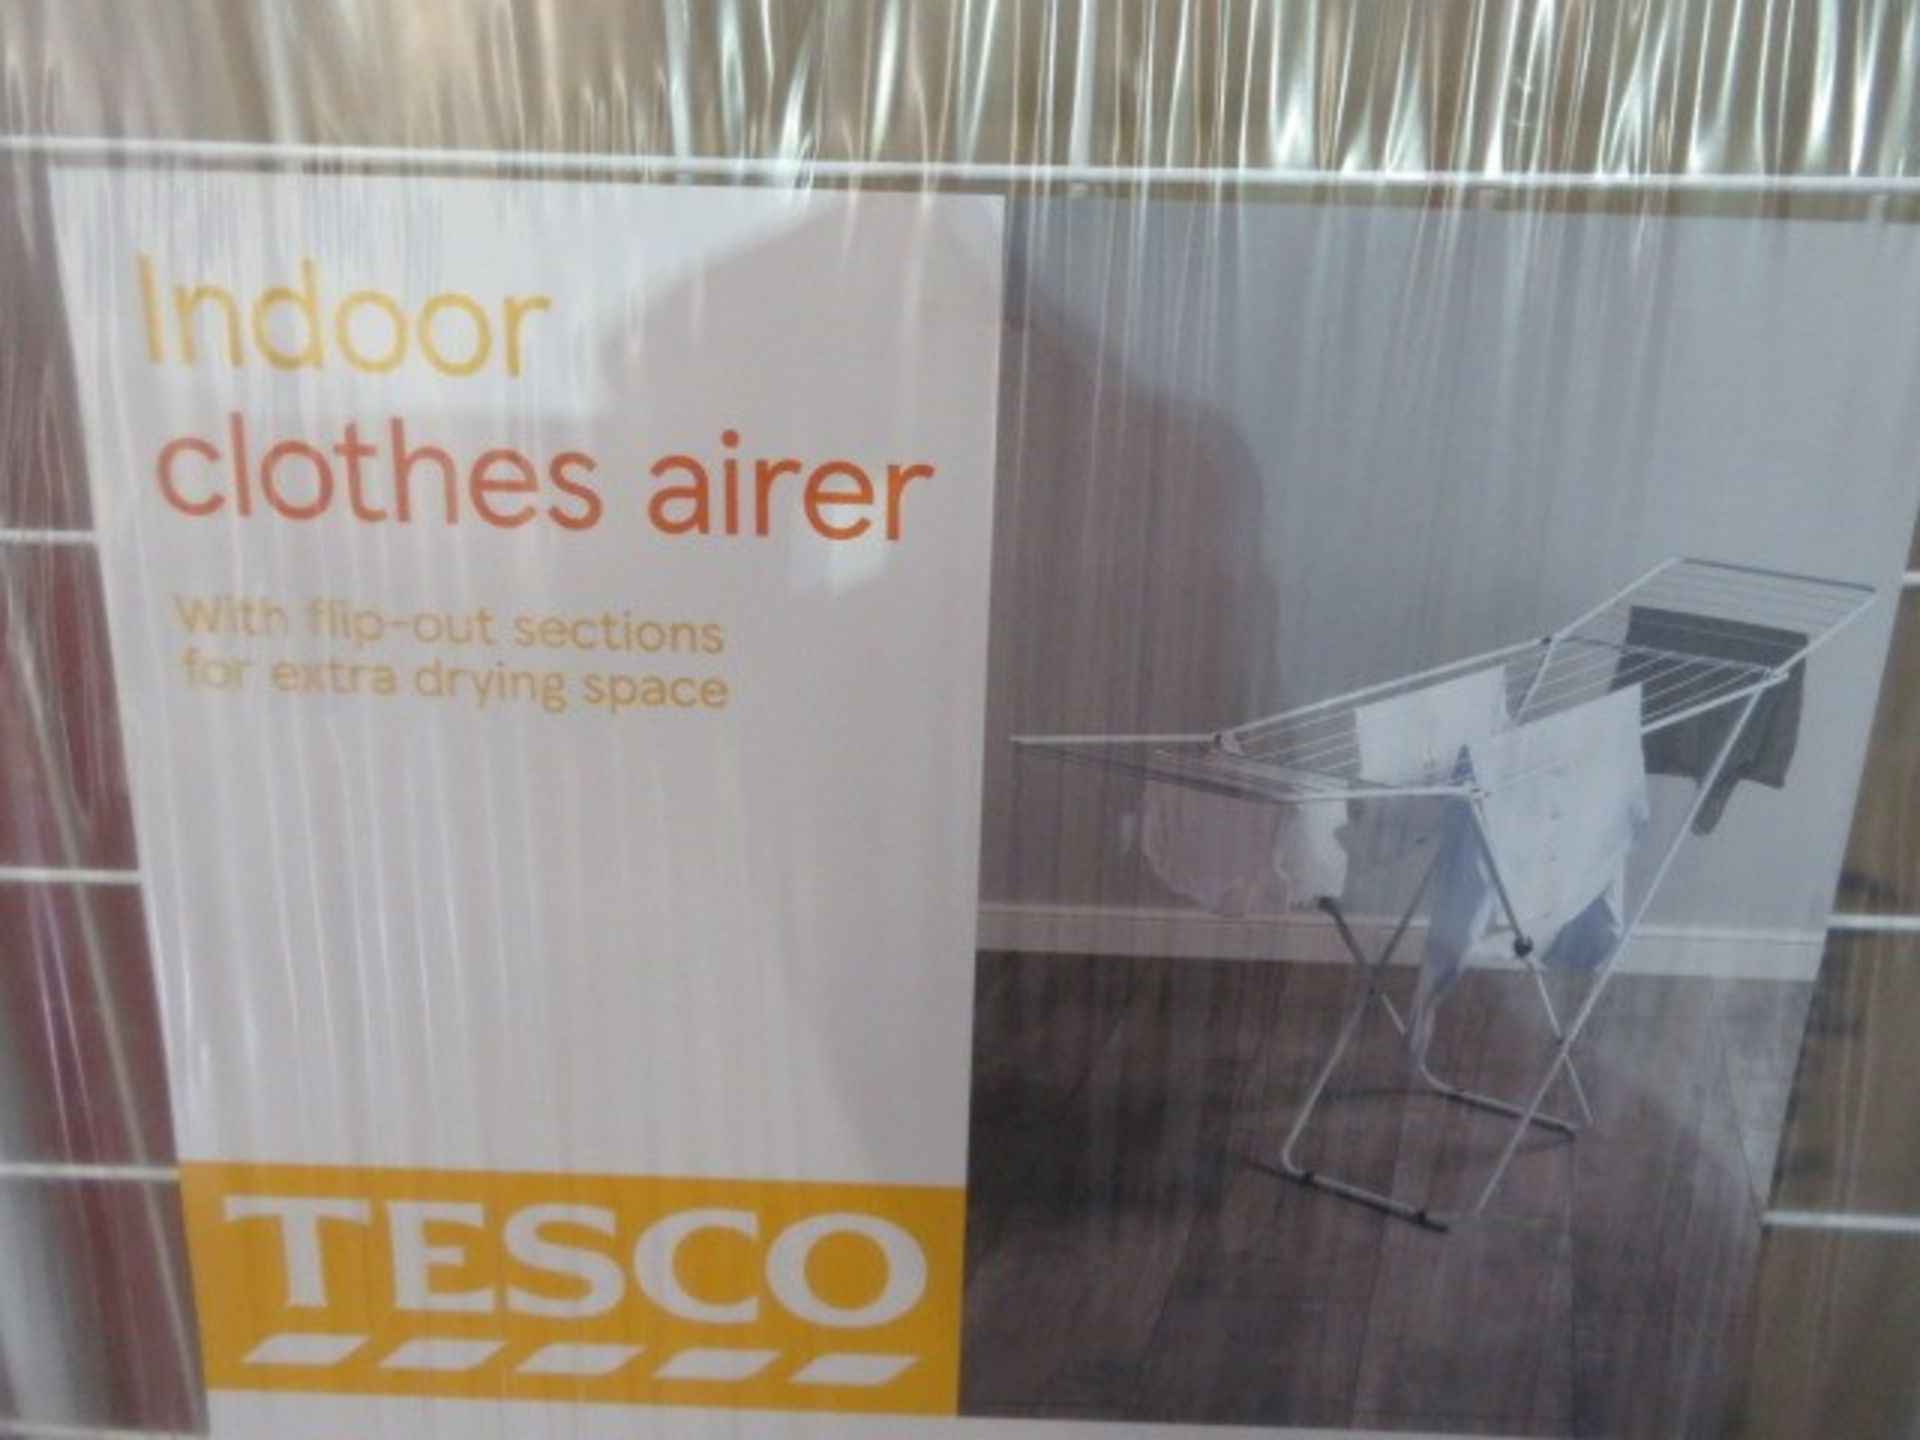 18 x Brand New & Packaged Tesco 18M Winged Airers